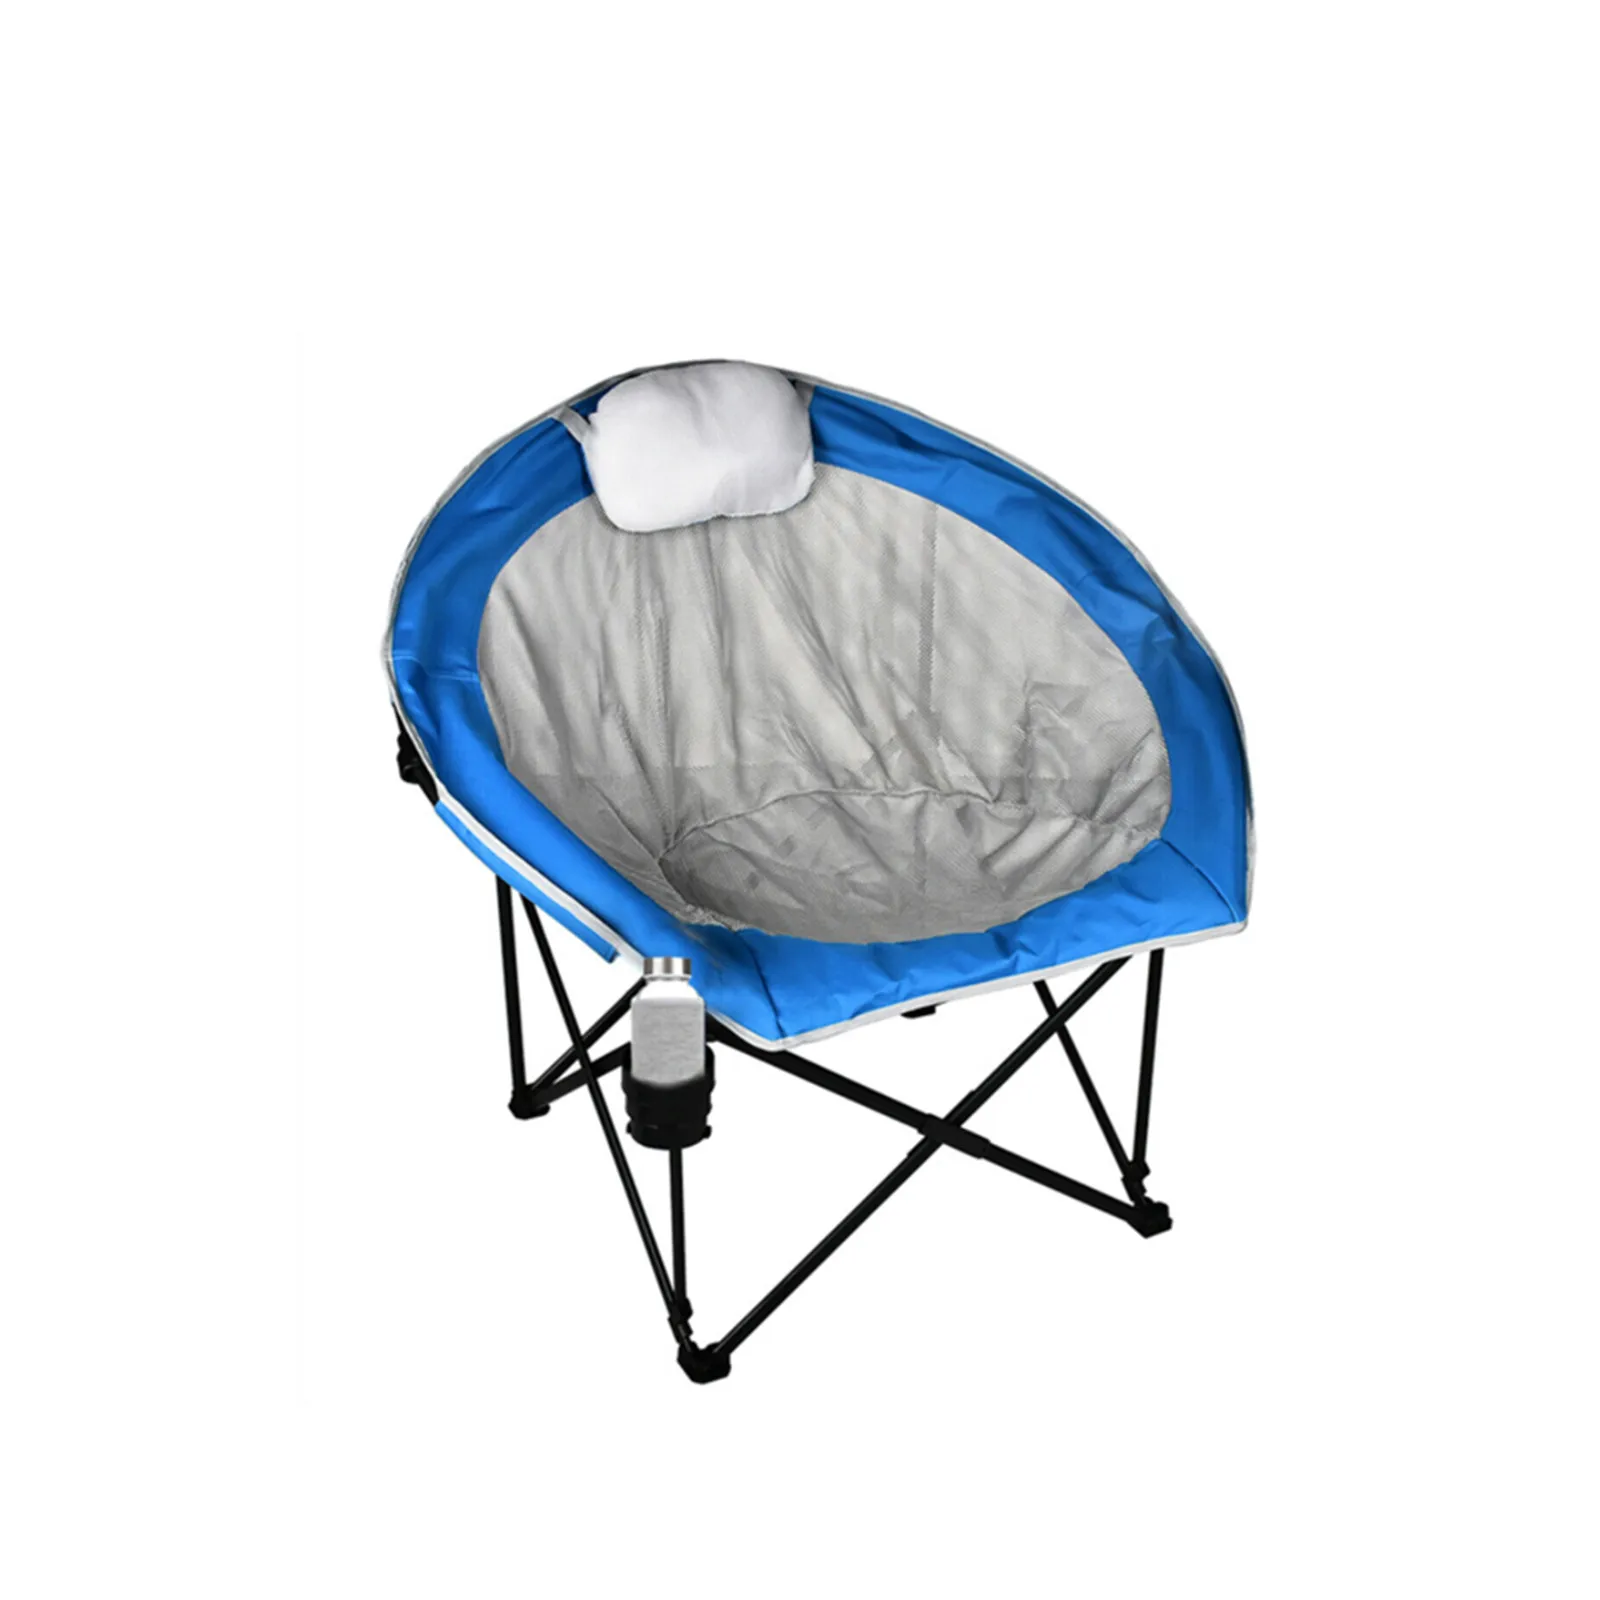 

600D PVC Folding Chair Steel Frame Camping Chair Load-Bearing 350 Lbs with Pillow Sea Blue[US-Stock]